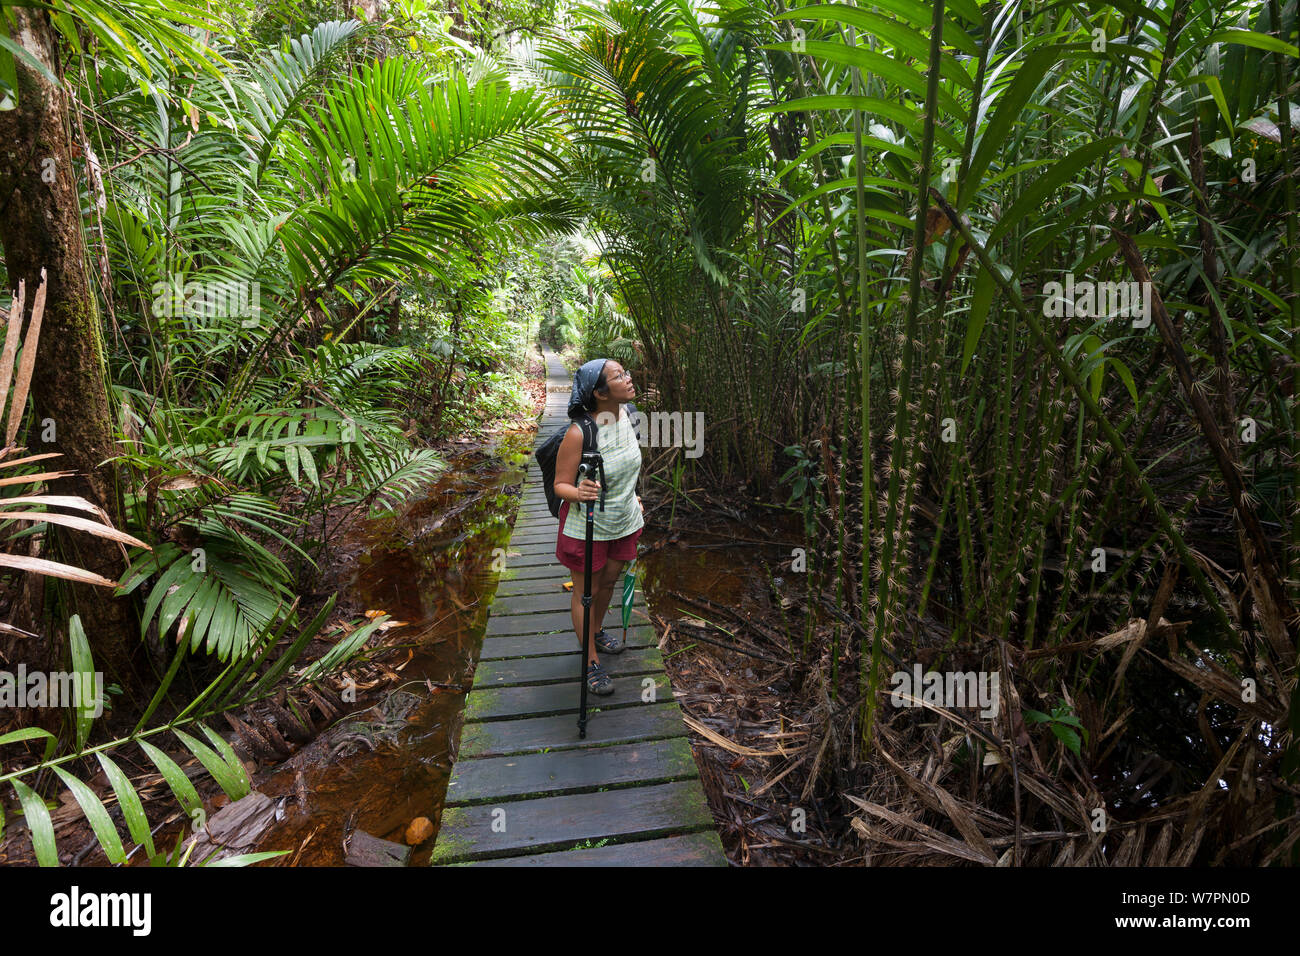 Tourist walking the forest boardwalk of Bako National Park, Sarawak, Borneo, March 2012. Model released. Stock Photo